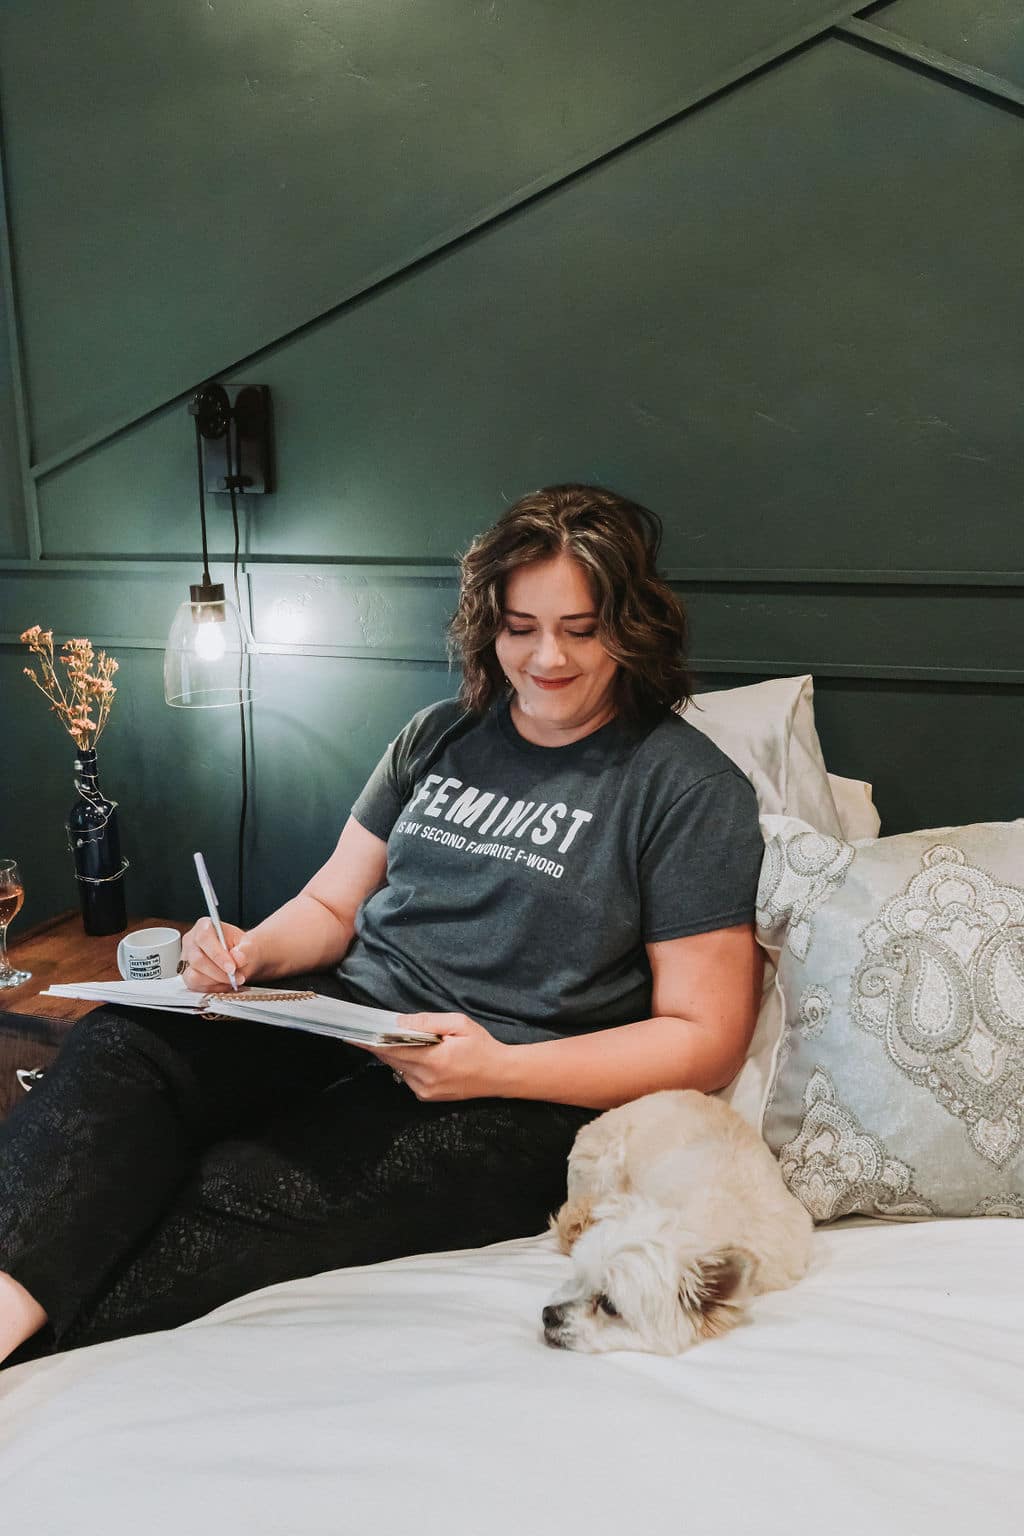 Angella sitting on her bed against a dark green wall with her two favorite things: her Soul Vision Planner and her dog, Sadie.